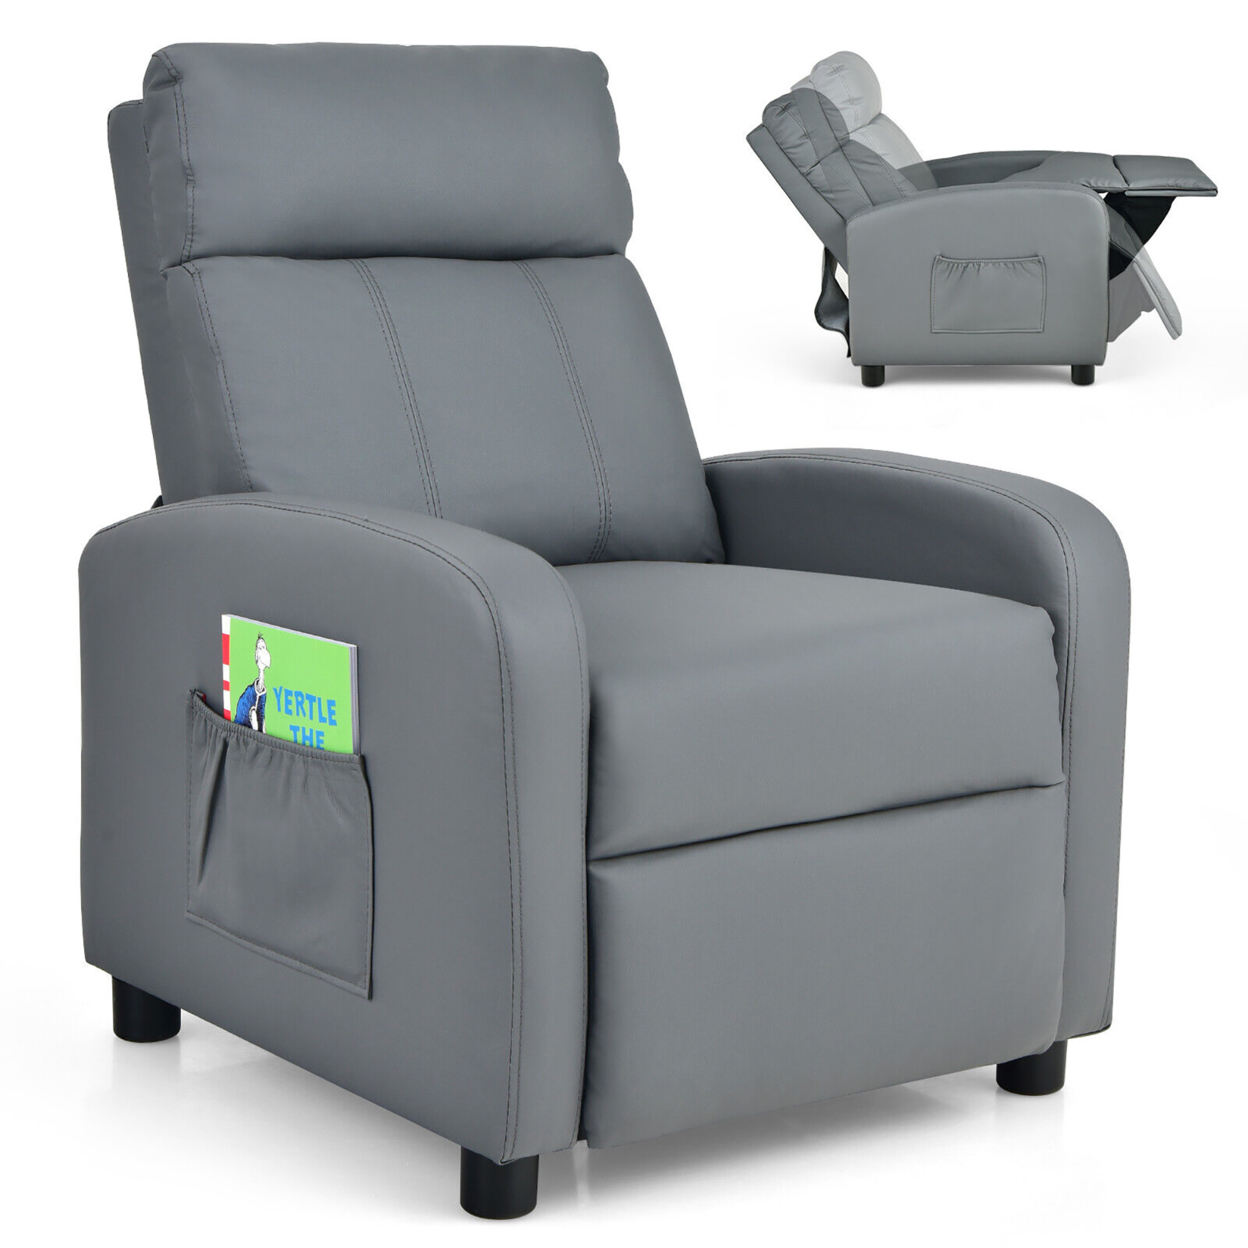 Kids Recliner Chair Adjustable Leather Sofa Armchair W/ Footrest Side Pocket - Grey